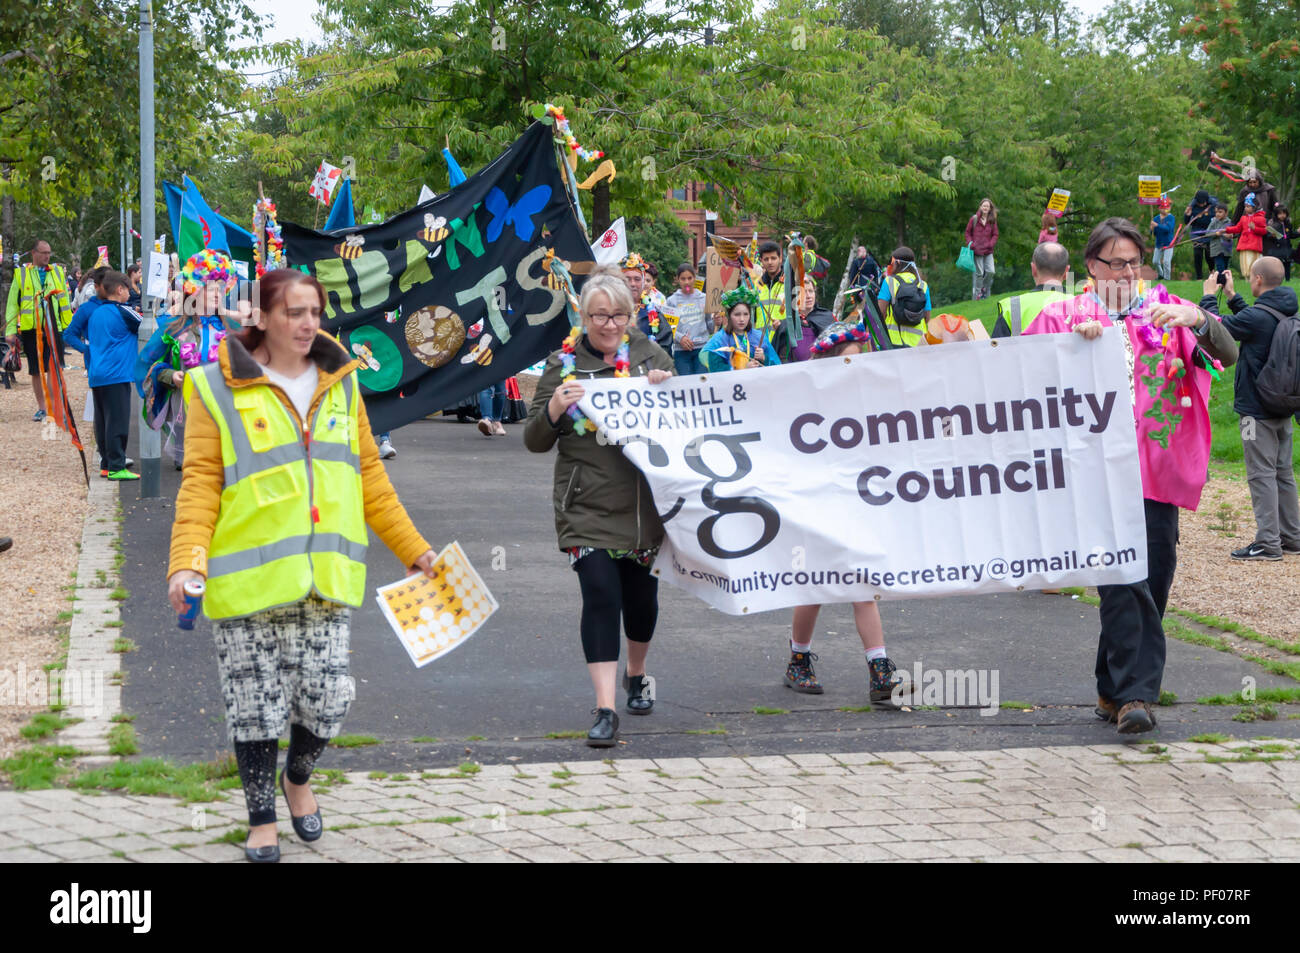 Glasgow, Scotland, UK. 18th August, 2018. A banner saying Crosshill & Govanhill  Community Council is carried at the start of the parade of the Govanhill International Festival & Carnival. This year's parade includes community groups, a pipe band, drummers, dancers, jugglers, roller skaters and a brass band all starting at Govanhill Park and travelling through the streets of Govanhill finishing at the Queen's Park Arena. Credit: Skully/Alamy Live News Stock Photo